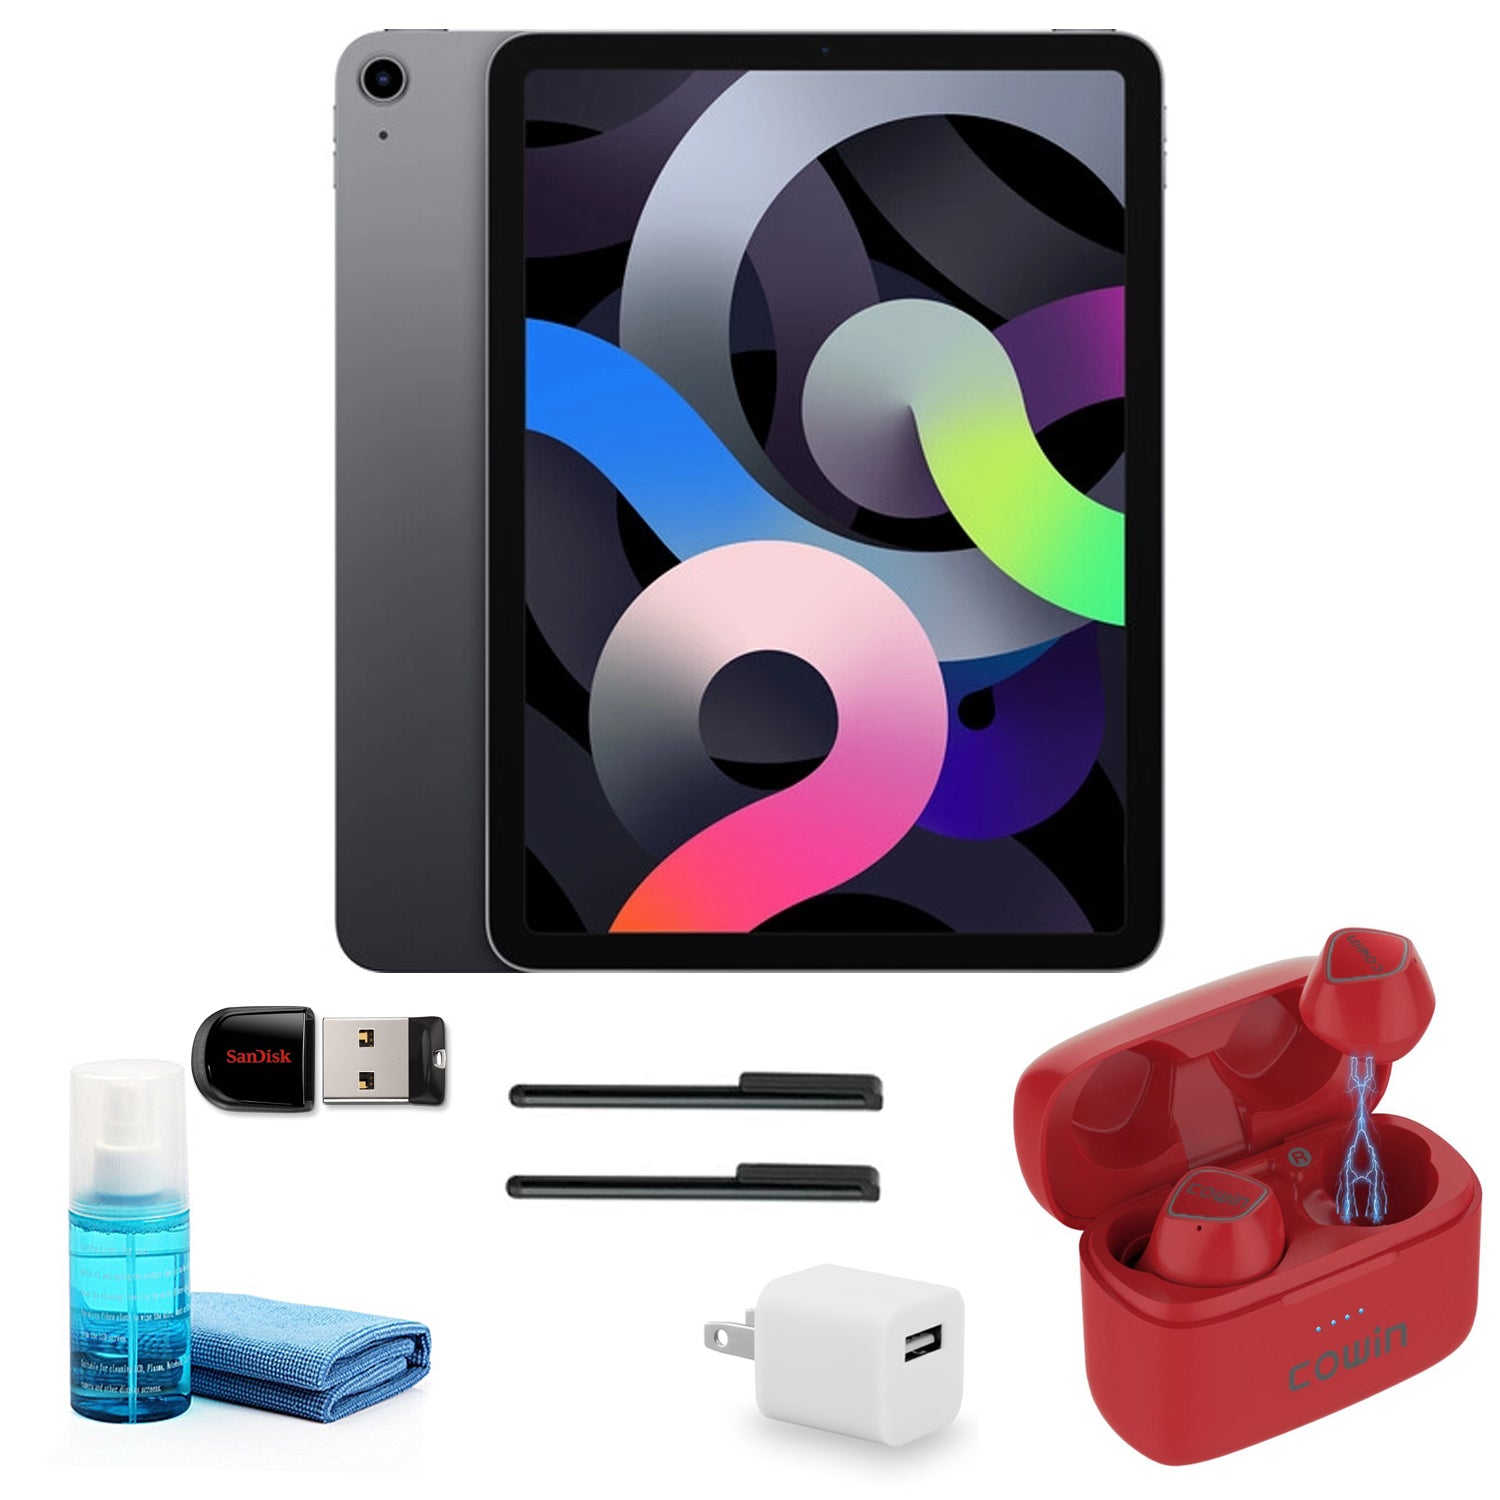 Apple iPad Air 10.9 Inch (64GB, Space Gray) with Red Wireless Earbuds and more